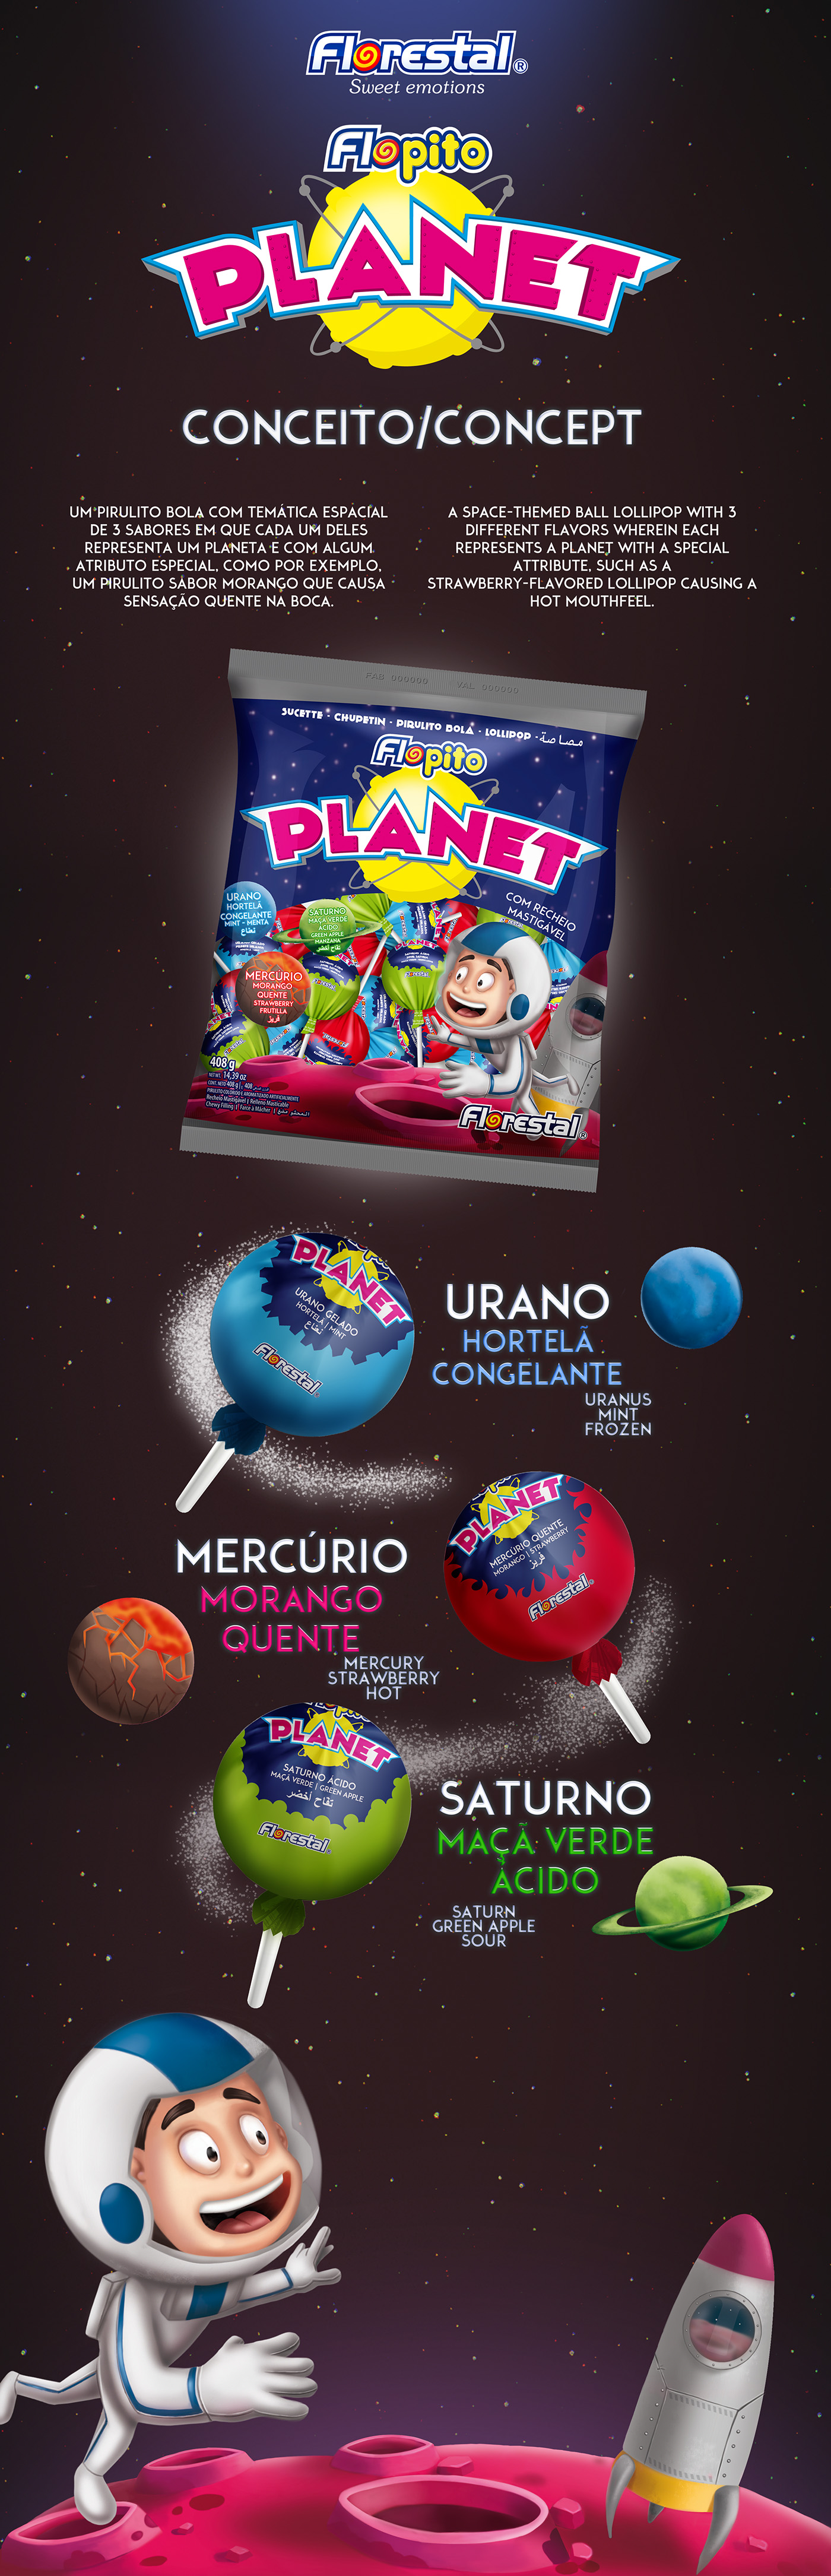 lollipop planet universe astronaut flavors kids Candy spaceship ball lollipop candie Character draw digital painting